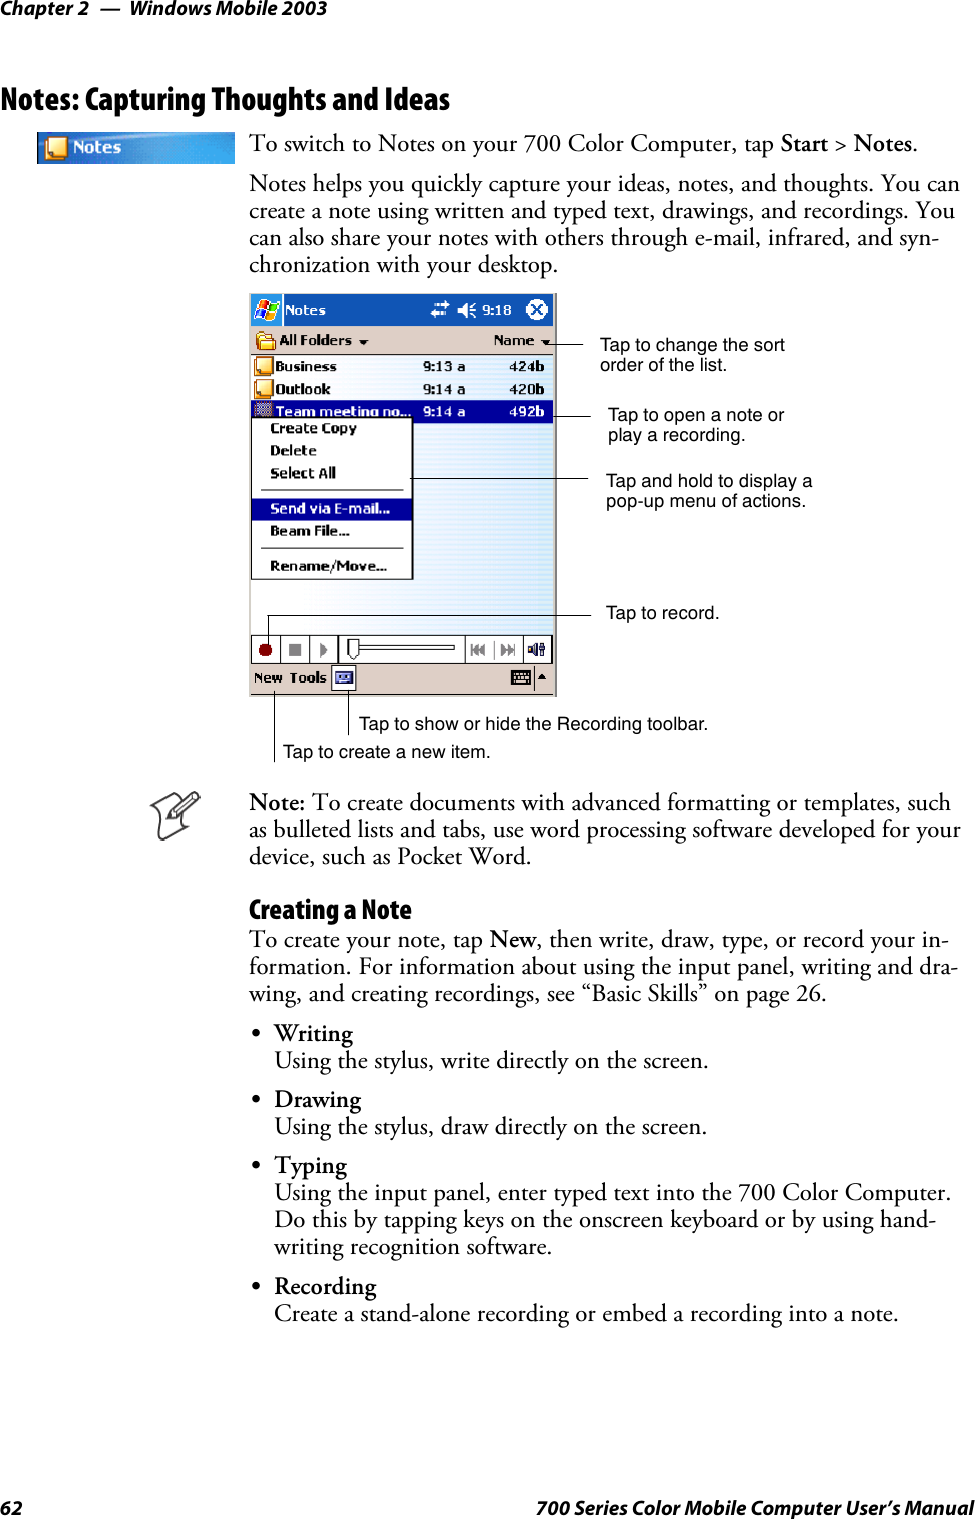 Windows Mobile 2003Chapter —262 700 Series Color Mobile Computer User’s ManualNotes: Capturing Thoughts and IdeasTo switch to Notes on your 700 Color Computer, tap Start &gt;Notes.Notes helps you quickly capture your ideas, notes, and thoughts. You cancreate a note using written and typed text, drawings, and recordings. Youcan also share your notes with others through e-mail, infrared, and syn-chronization with your desktop.Tap to change the sortorder of the list.Tap to create a new item.Taptoopenanoteorplay a recording.Tap and hold to display apop-up menu of actions.Tap to record.Tap to show or hide the Recording toolbar.Note: To create documents with advanced formatting or templates, suchas bulleted lists and tabs, use word processing software developed for yourdevice, such as Pocket Word.Creating a NoteTo create your note, tap New, then write, draw, type, or record your in-formation. For information about using the input panel, writing and dra-wing, and creating recordings, see “Basic Skills” on page 26.SWritingUsing the stylus, write directly on the screen.SDrawingUsing the stylus, draw directly on the screen.STypingUsing the input panel, enter typed text into the 700 Color Computer.Do this by tapping keys on the onscreen keyboard or by using hand-writing recognition software.SRecordingCreate a stand-alone recording or embed a recording into a note.